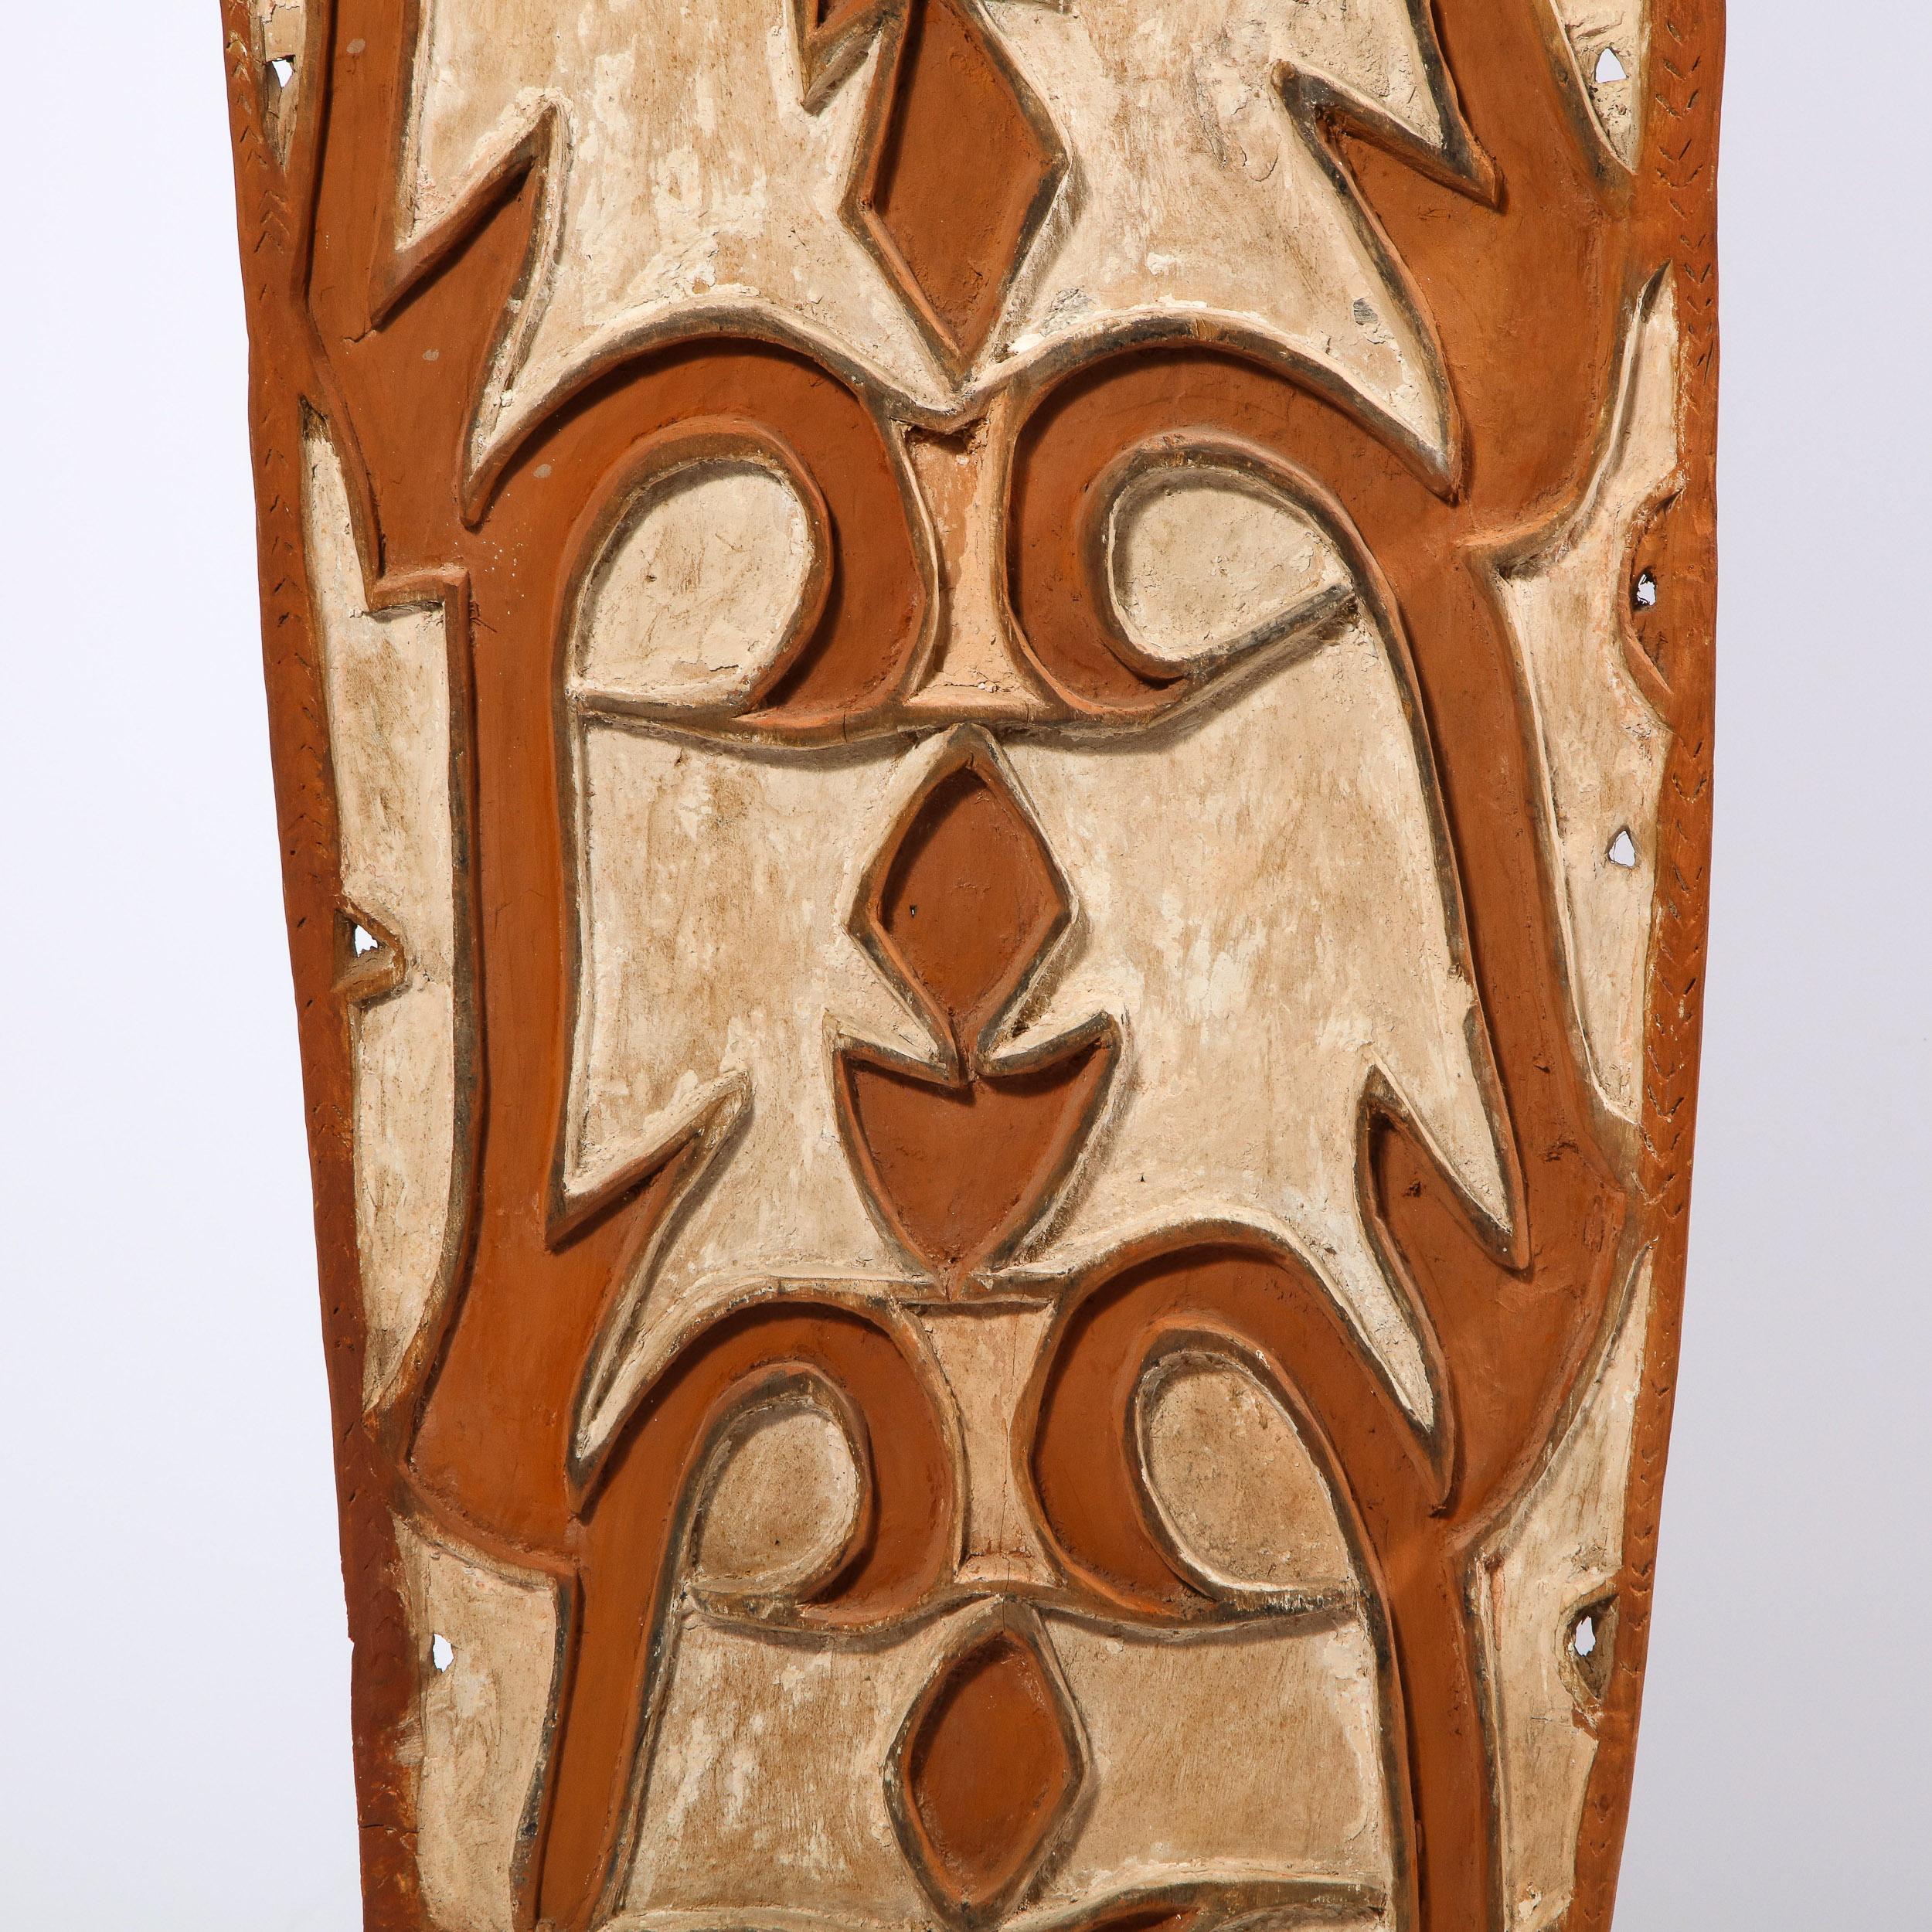 This striking shield was realized in Papua New Guinea, circa 1960. The rectangular form in unfinished nubuck hued hardwood has been inscribed with white curvilinear and geometric patterns. A small carved wood figurine adorns the top of the shield.